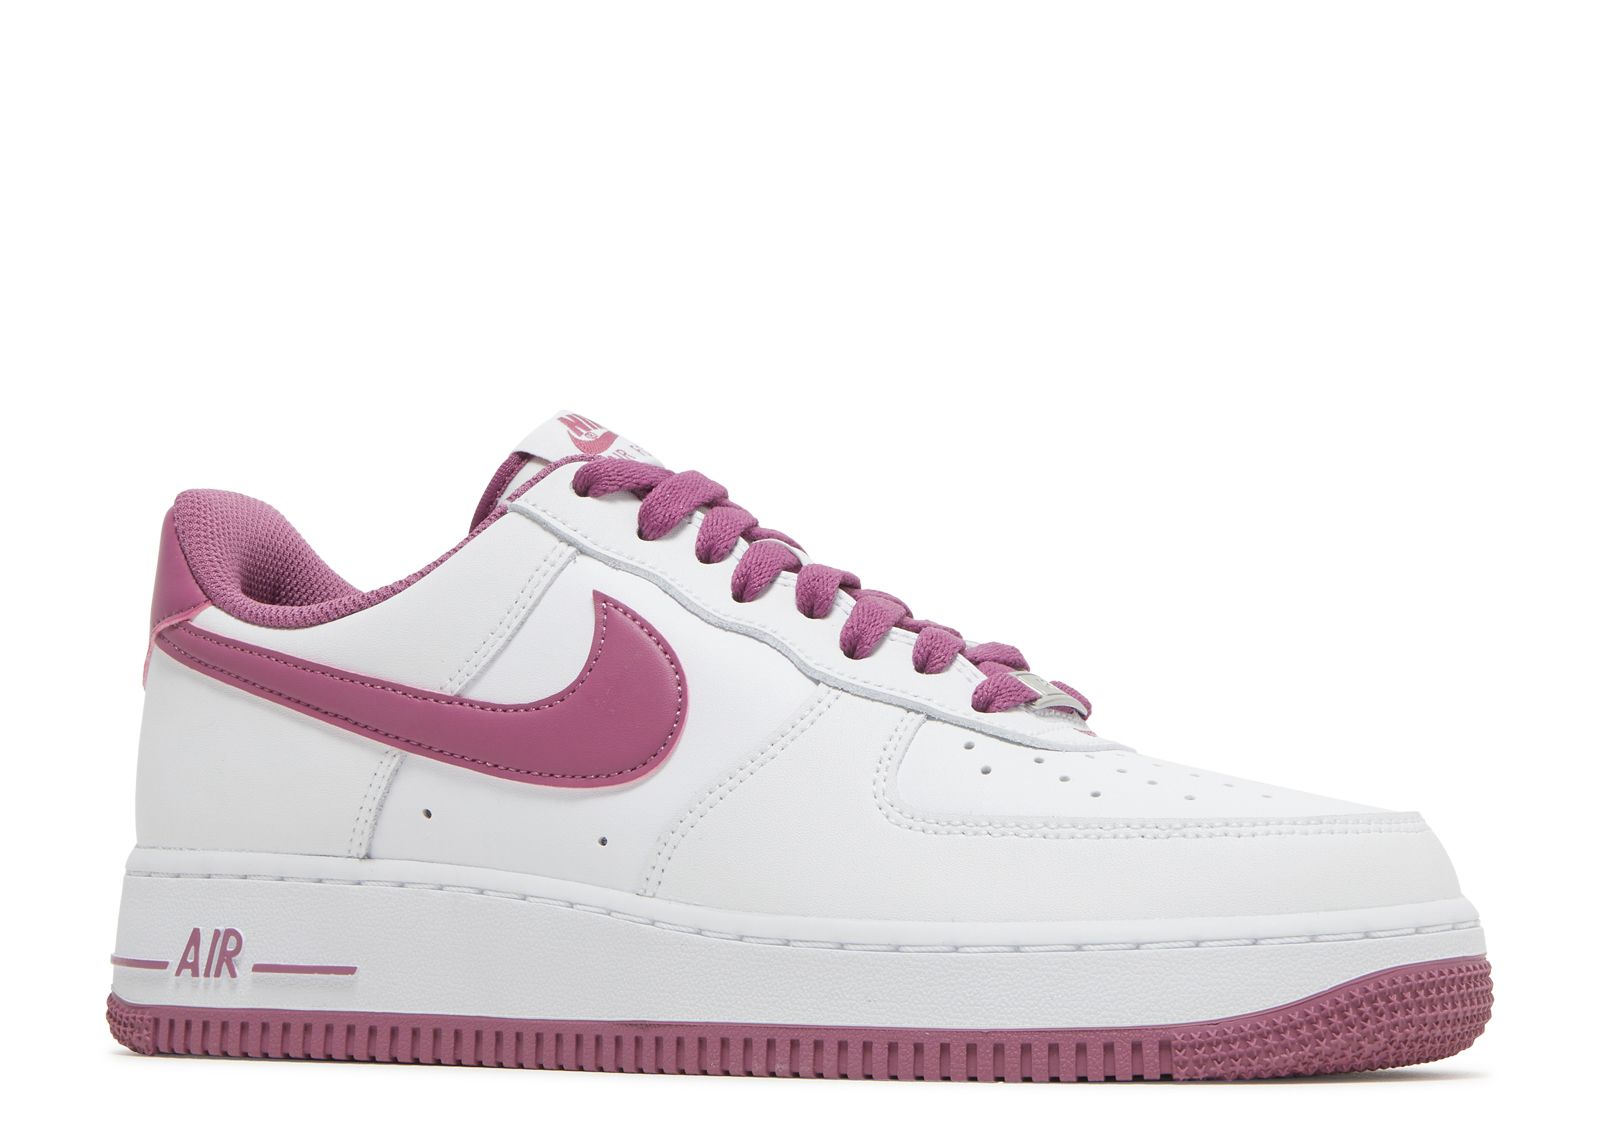 Corrupt above Deliberate Air Force 1 '07 'Light Bordeaux' - Nike - DH7561 101 - white/light  bordeaux/white | Flight Club